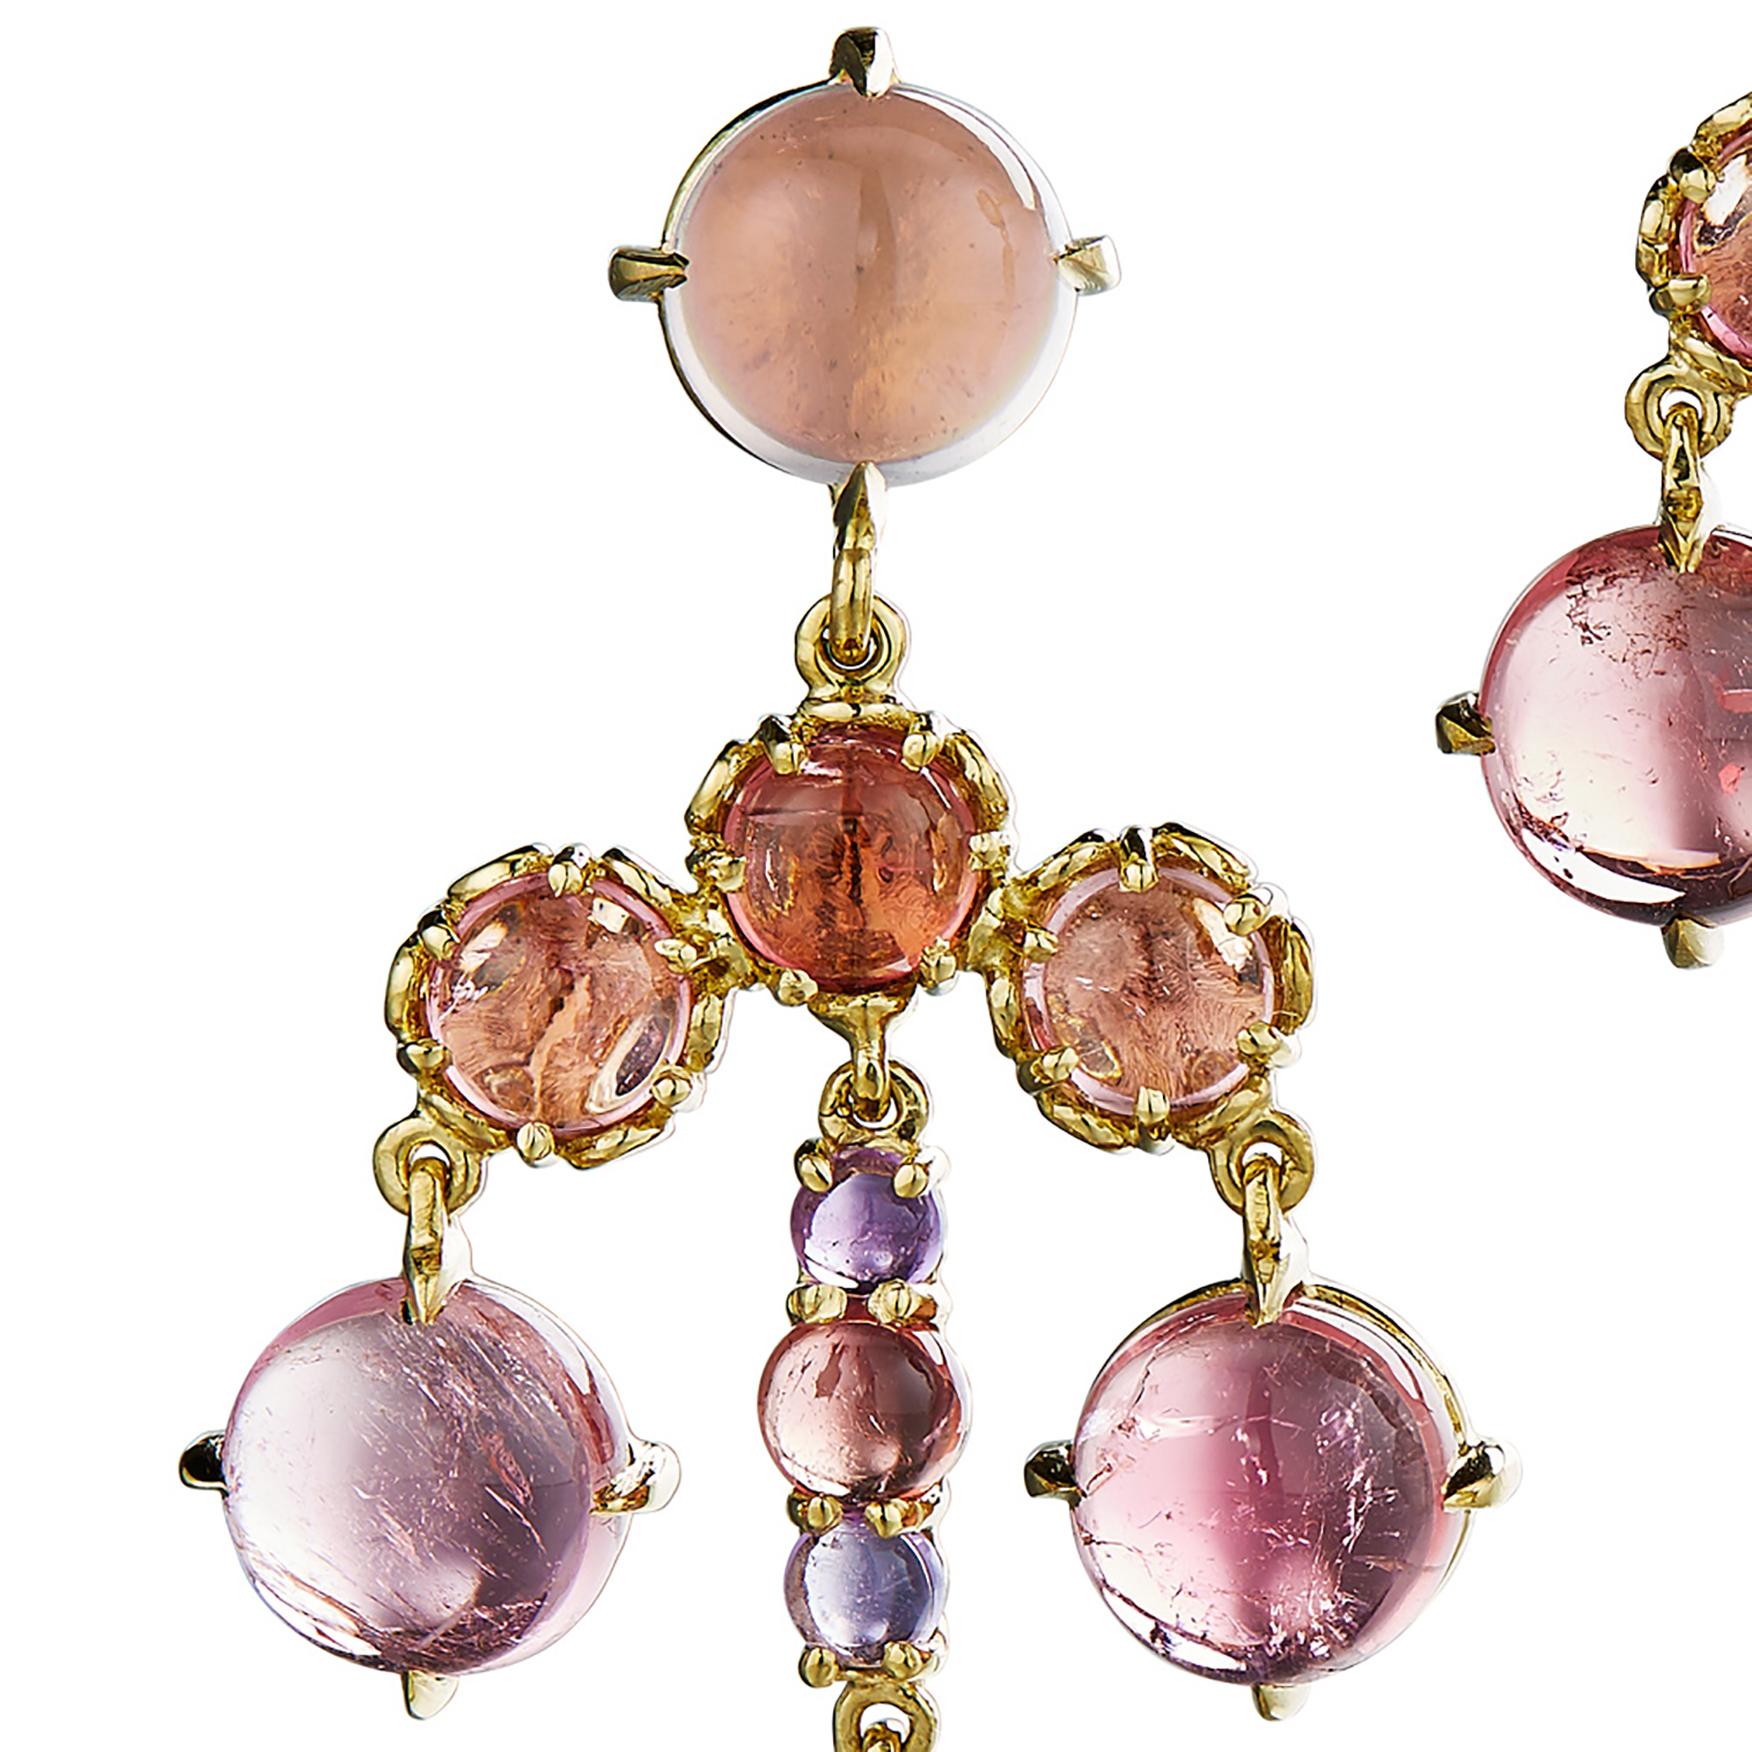 A sumptuous collection of gemstones make up these eye-catching chandelier earrings. Earrings in 18k yellow gold with rose quartz, amethyst, pink tourmaline. For pierced ears with a post backing.

Daria de Koning’s one-of-a-kind cabochon-centric work